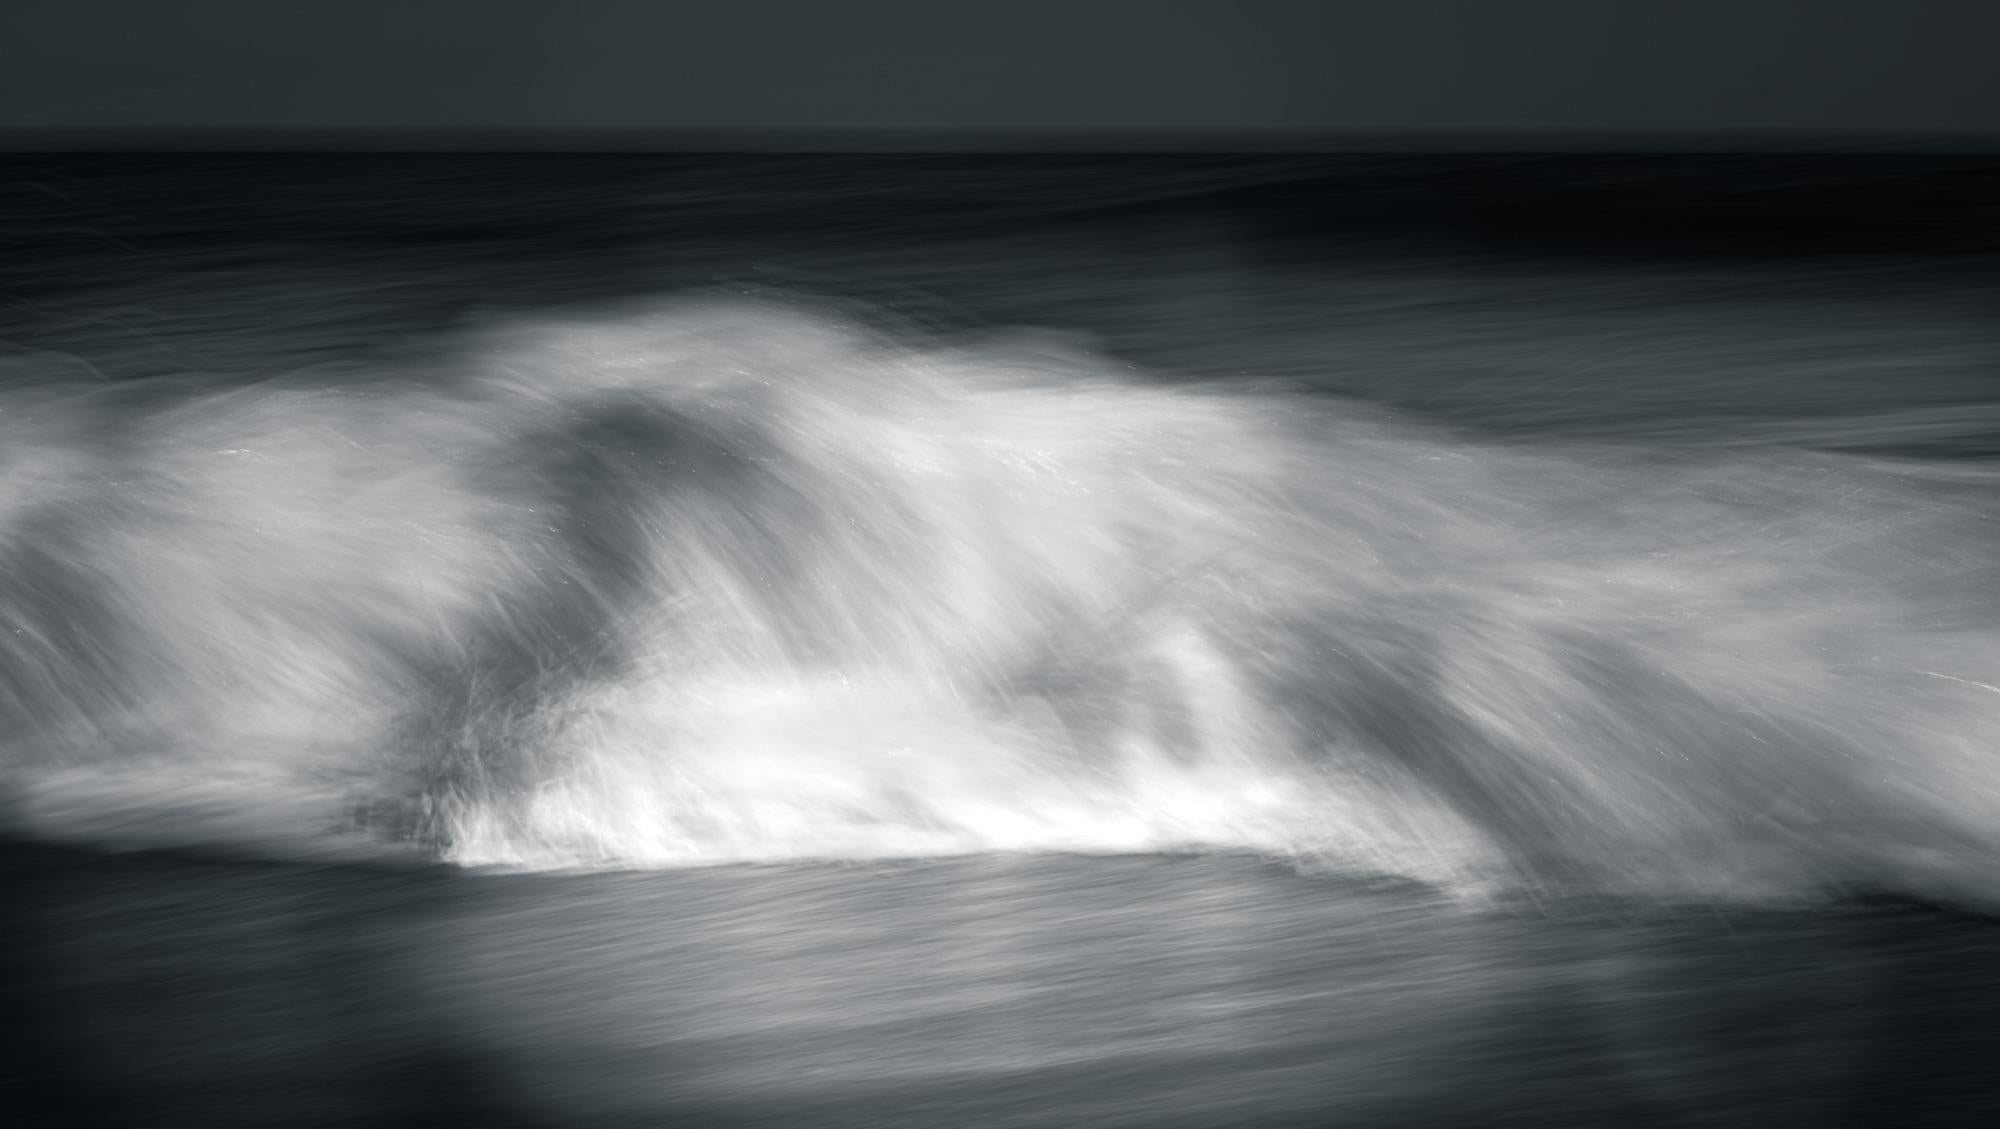 Limited Edition 1 / 7 Black and White Photograph Seascape - Kinetic #37
This is #37 from the Kinetic Solitude series. It has been shown in the Dow Museum of Fine Arts as part of a exhibition that explored variations on the theme of water.

My